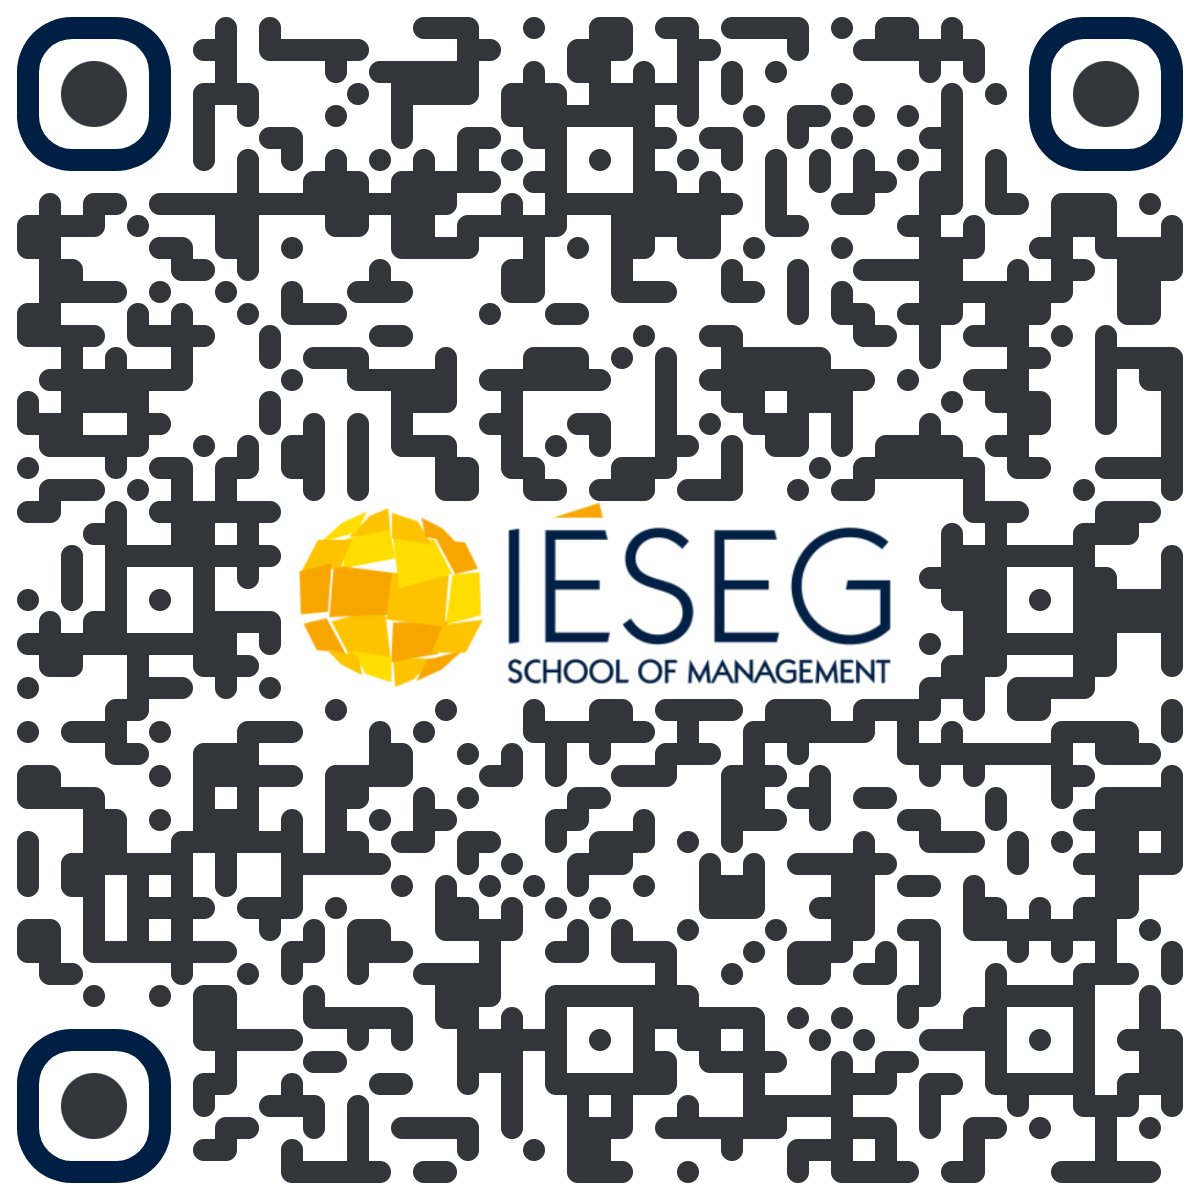 📢📢Come work with me @IESEGResearch 🚀🚀
Fully funded PhD position in Social Entrepreneurship in #Paris 🇫🇷
Scan the QR code or follow this link for more info and to apply!! recruitment.ieseg.fr/jobs/3742524-p…

#academicjob  #AcademicTwitter #SocEnt